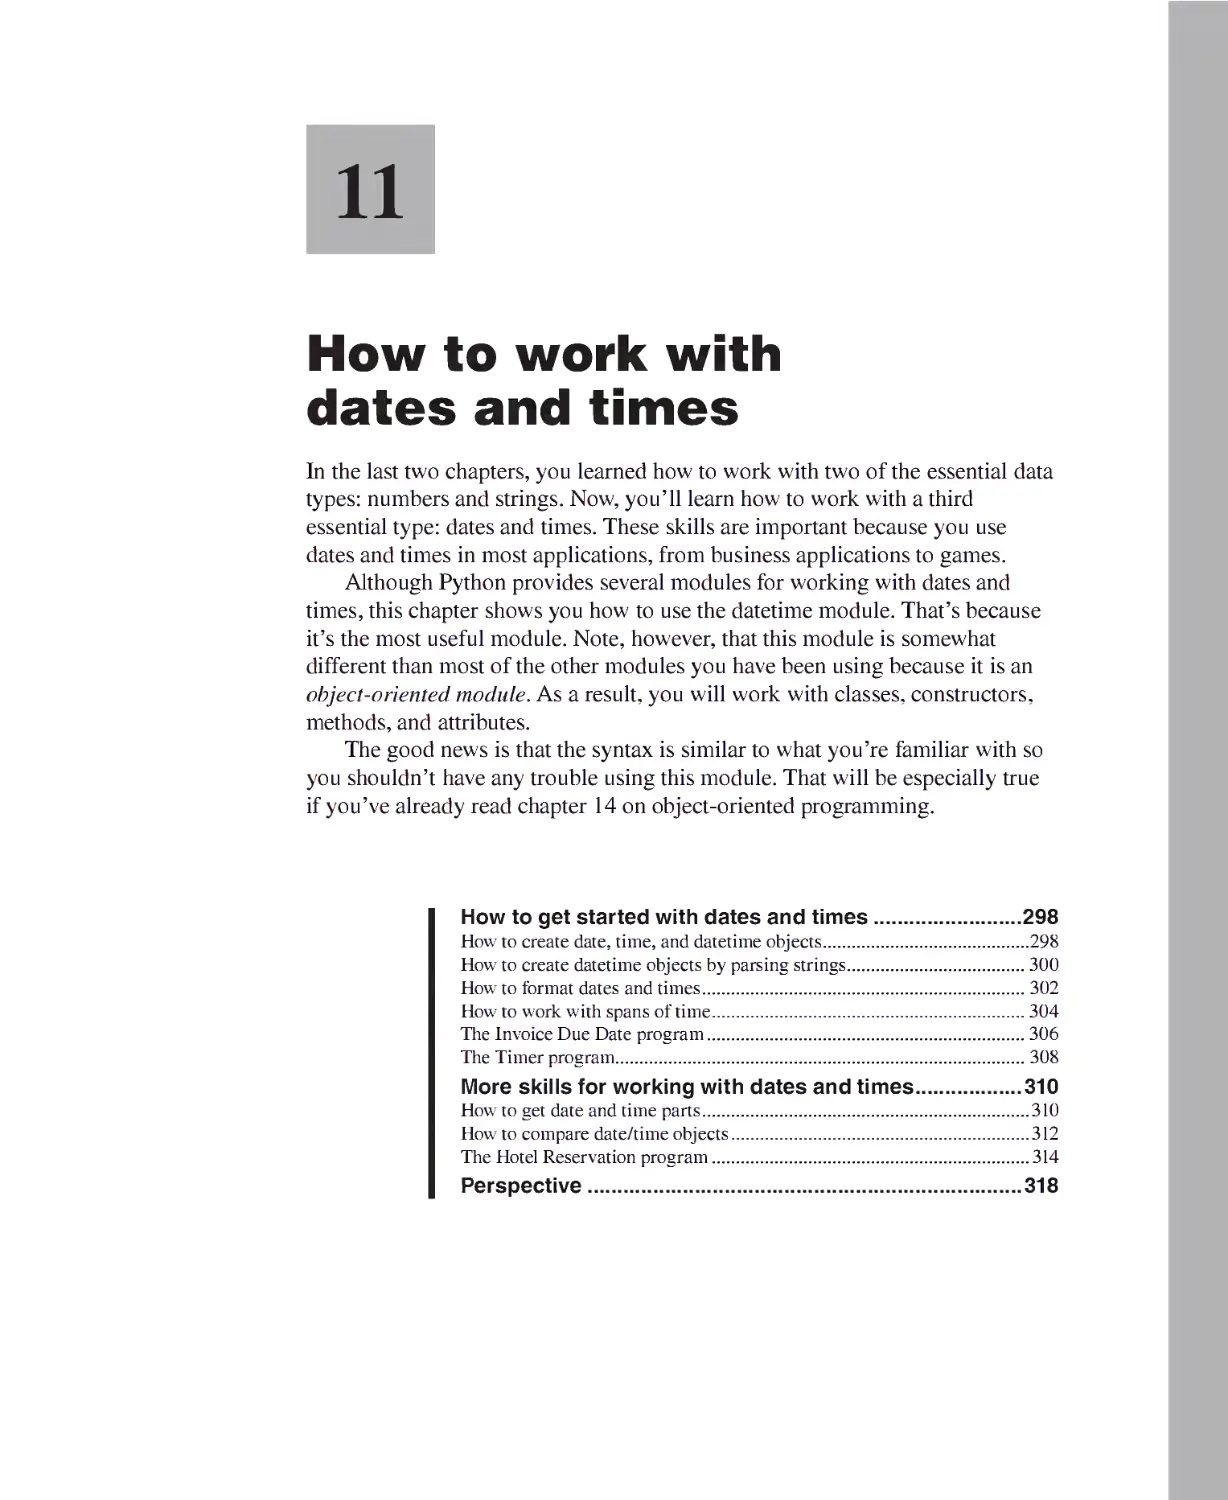 Chapter 11 - How to Work with Dates and Times